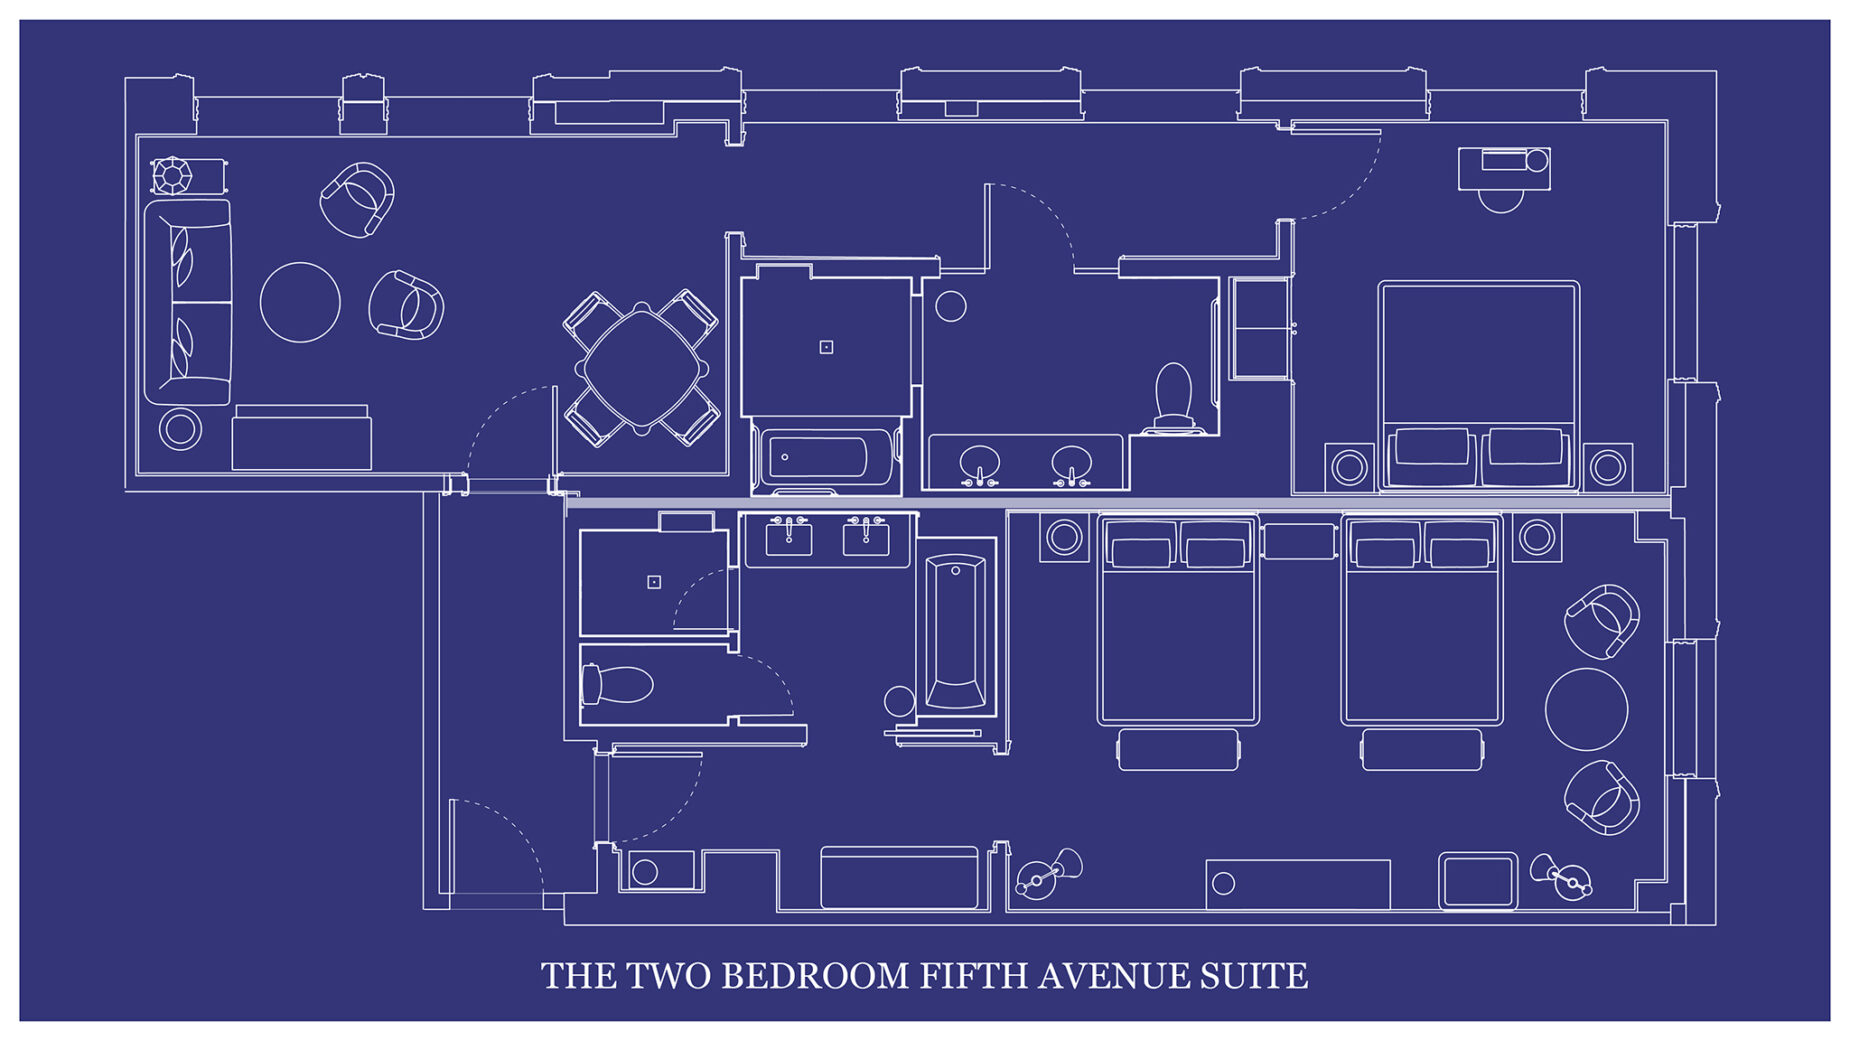 The architectural layout of "THE TWO BEDROOM FIFTH AVENUE SUITE" is depicted on a blueprint map.